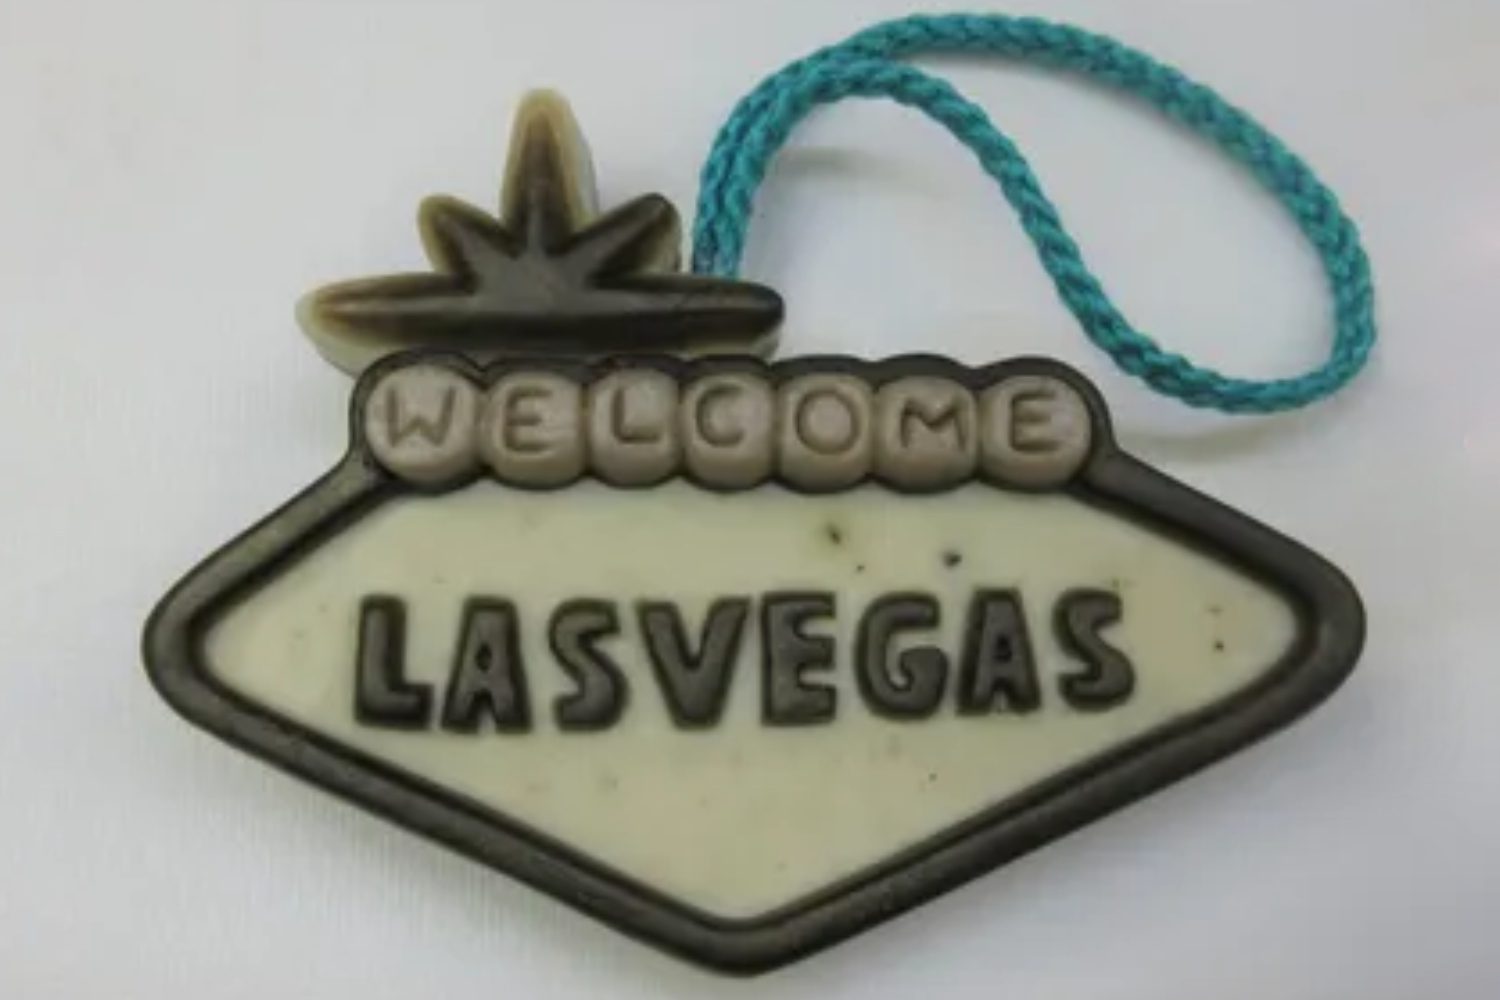 A las vegas sign ornament with the word welcome on it.